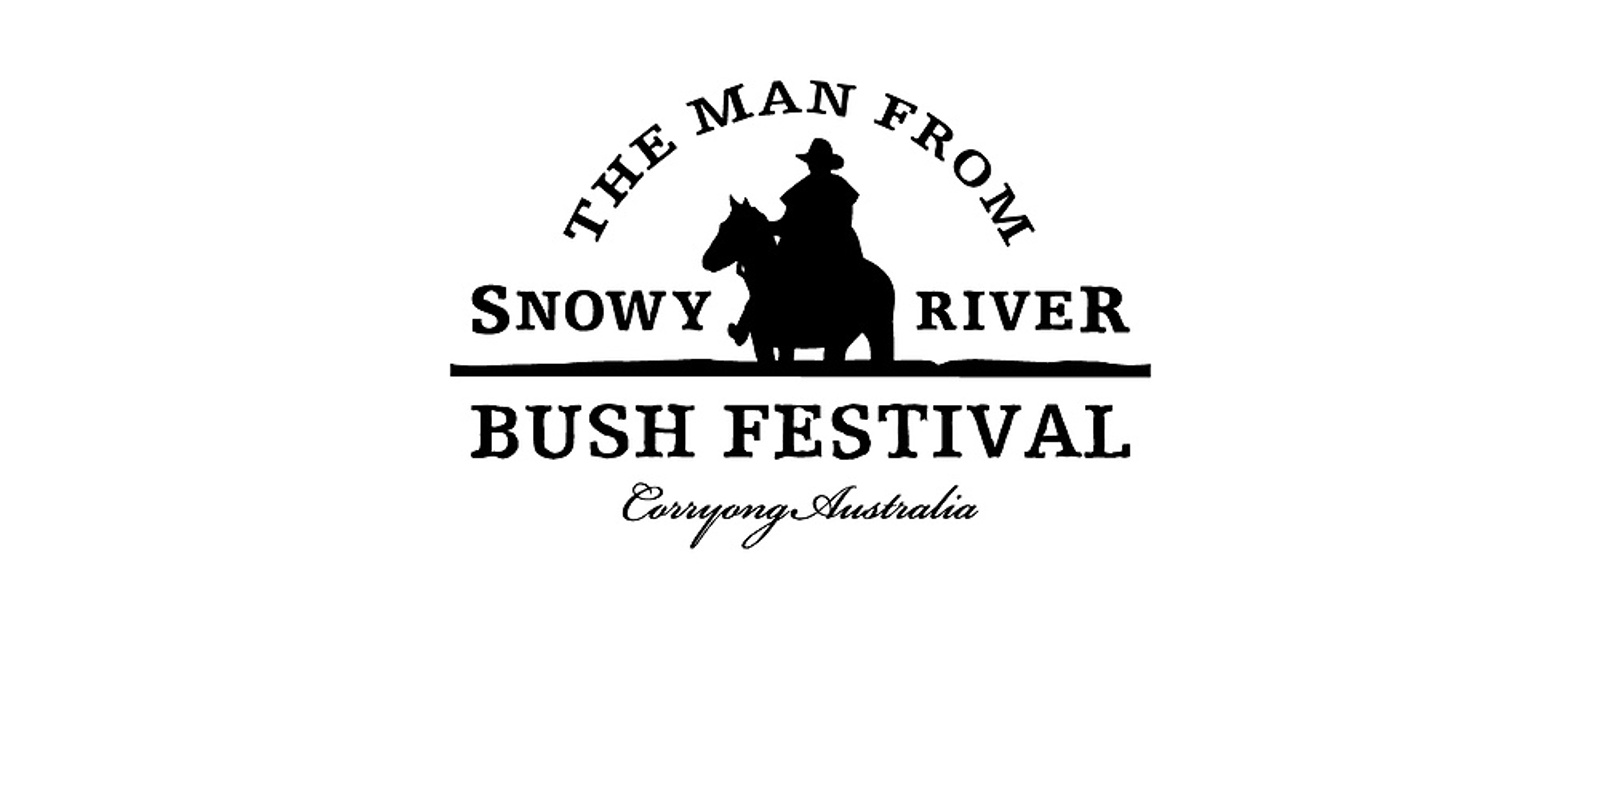 Banner image for The Man From Snowy River Bush Festival